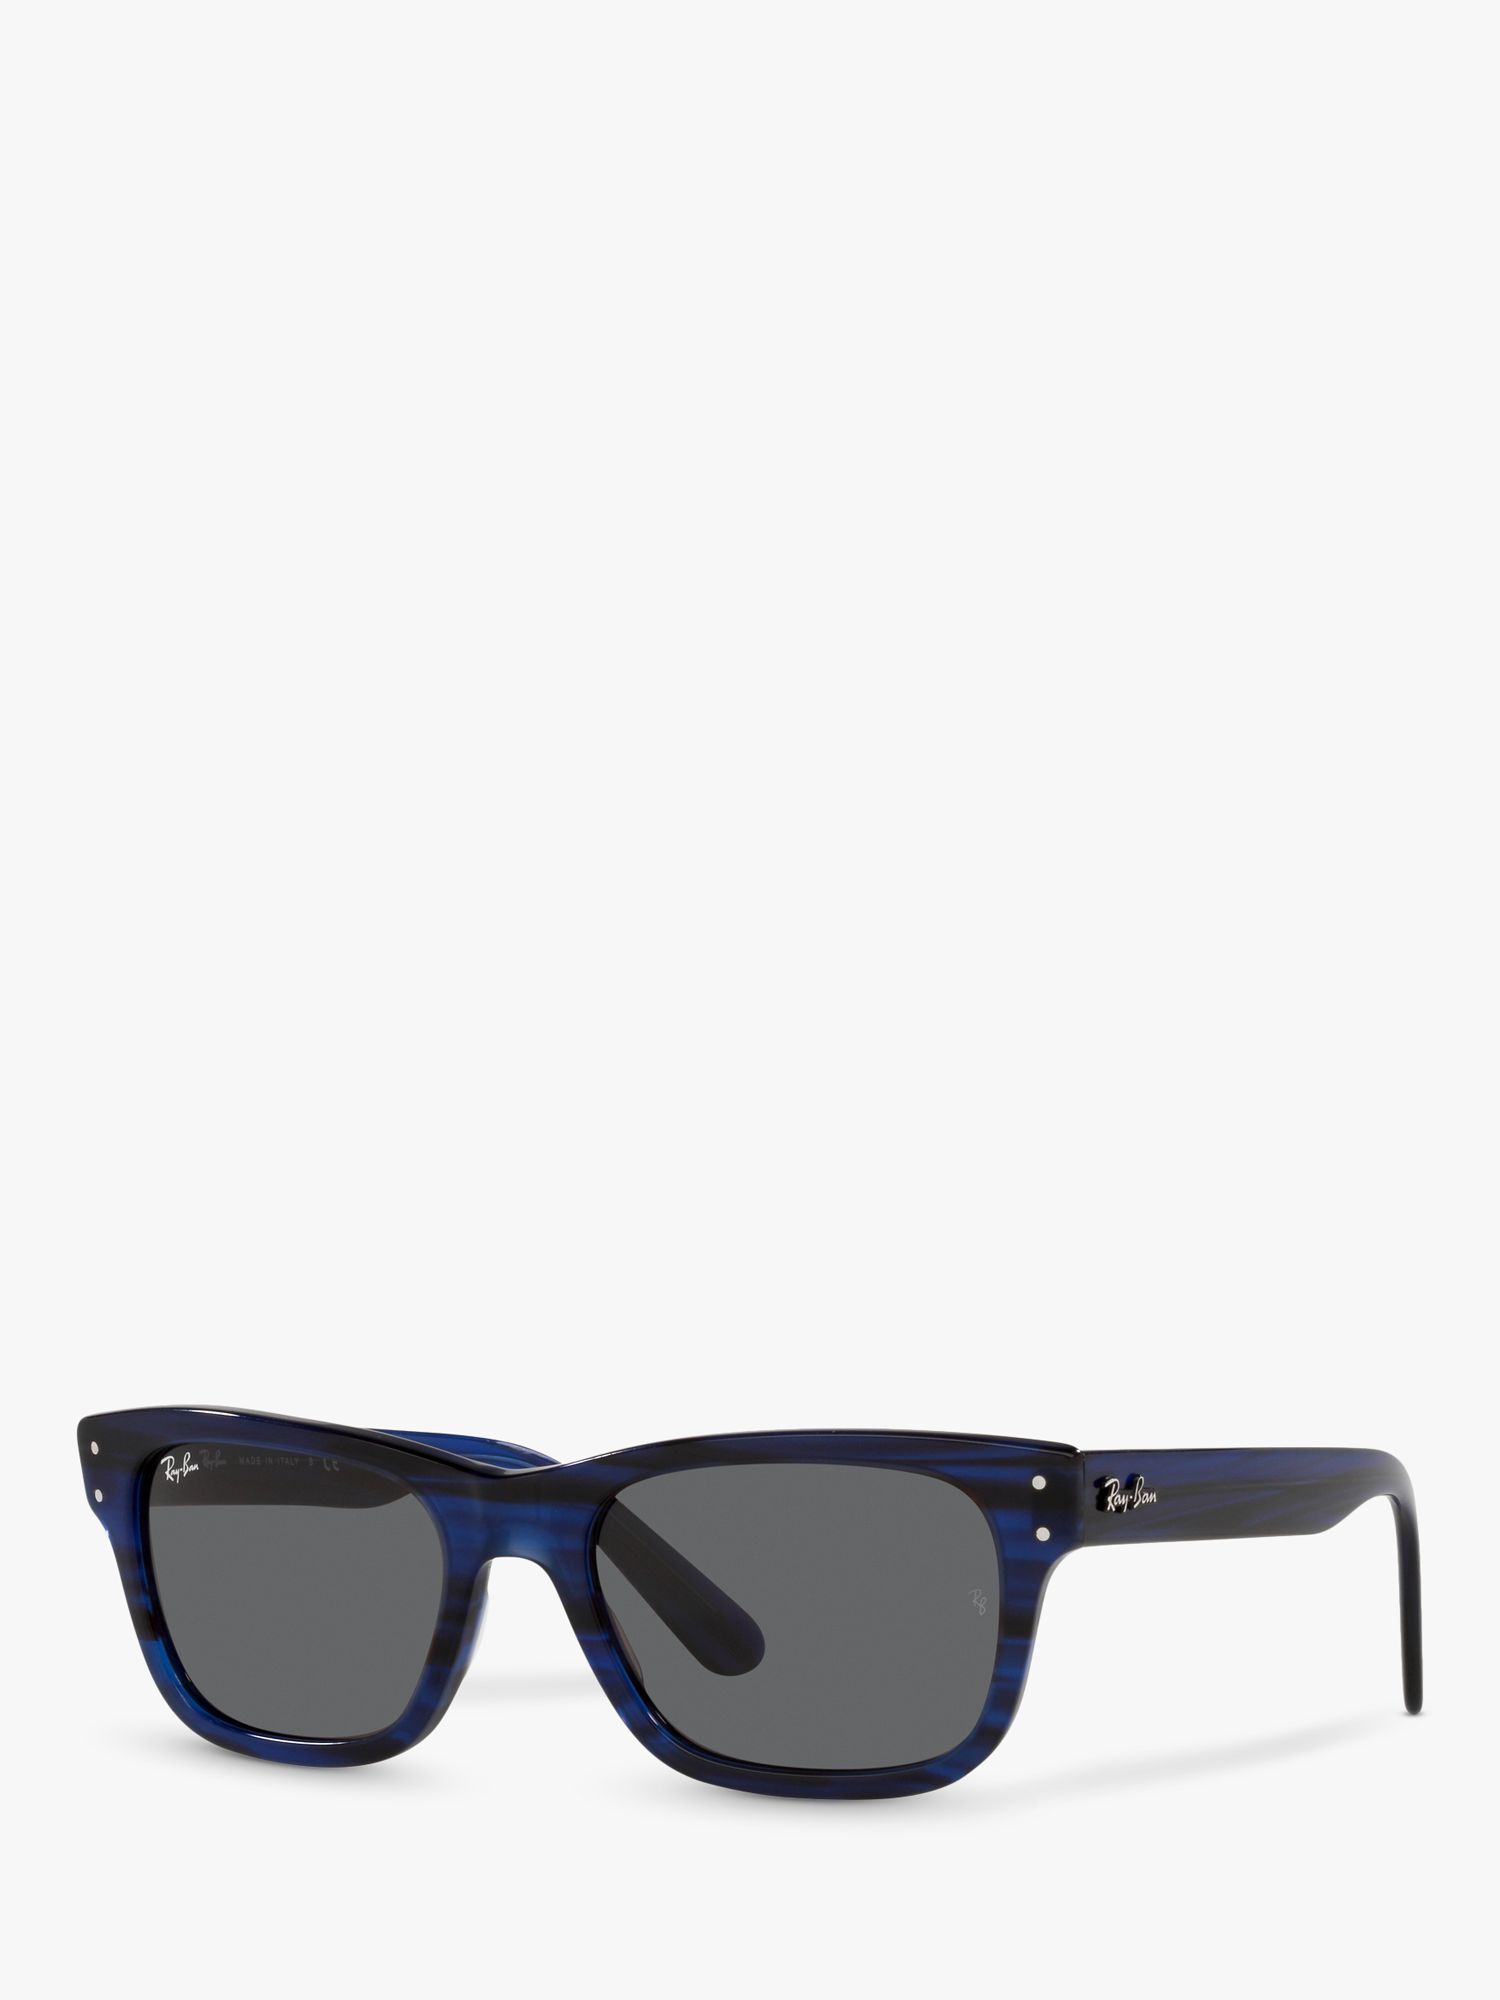 Ray-Ban RB2283901 Men's Sunglasses, Striped Blue/Grey at John Lewis &  Partners